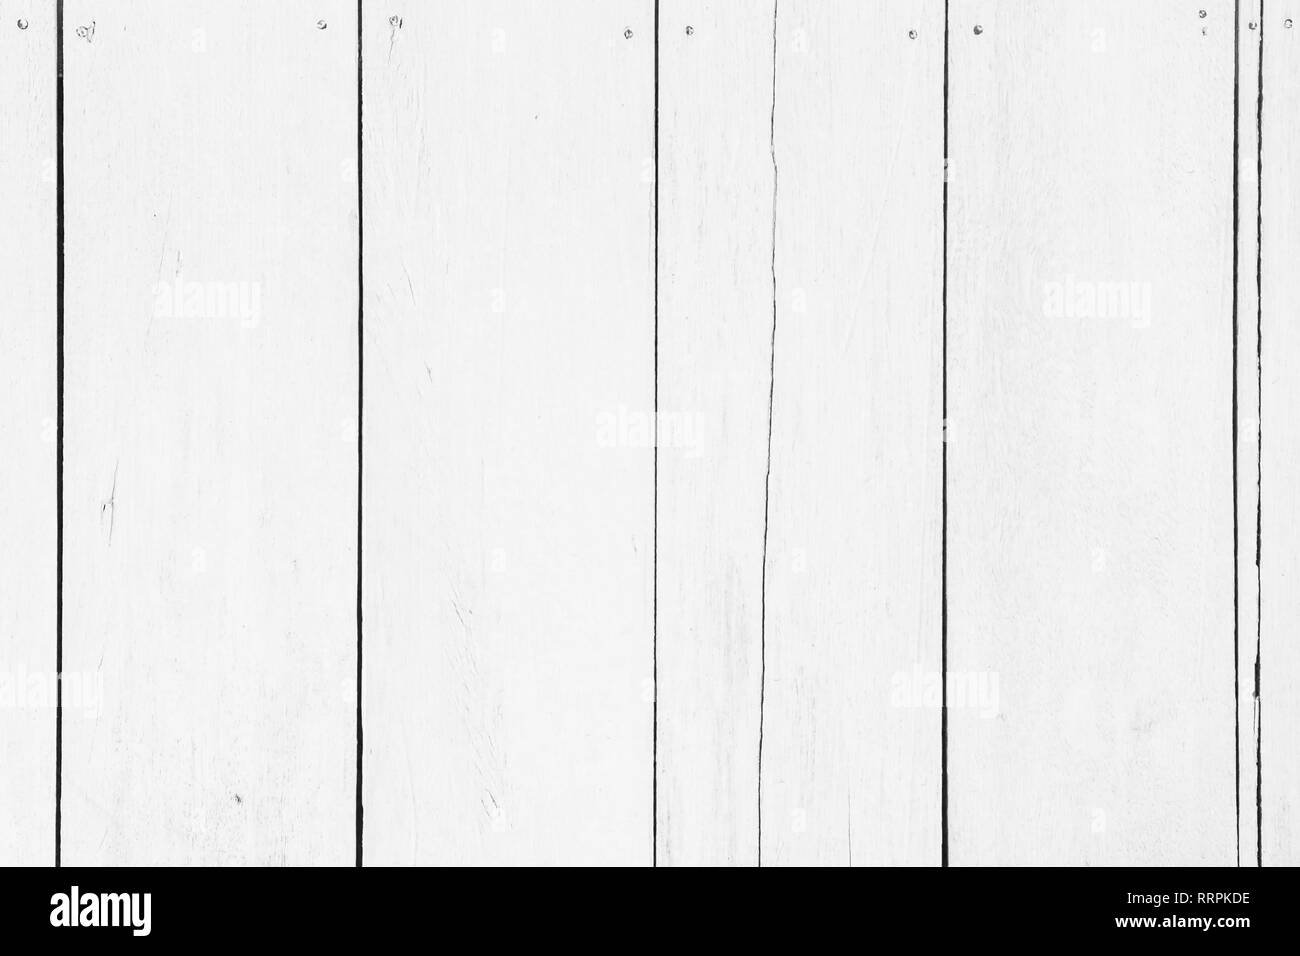 Wooden plank wood all antique cracked furniture weathered white vintage wallpaper texture background. Stock Photo